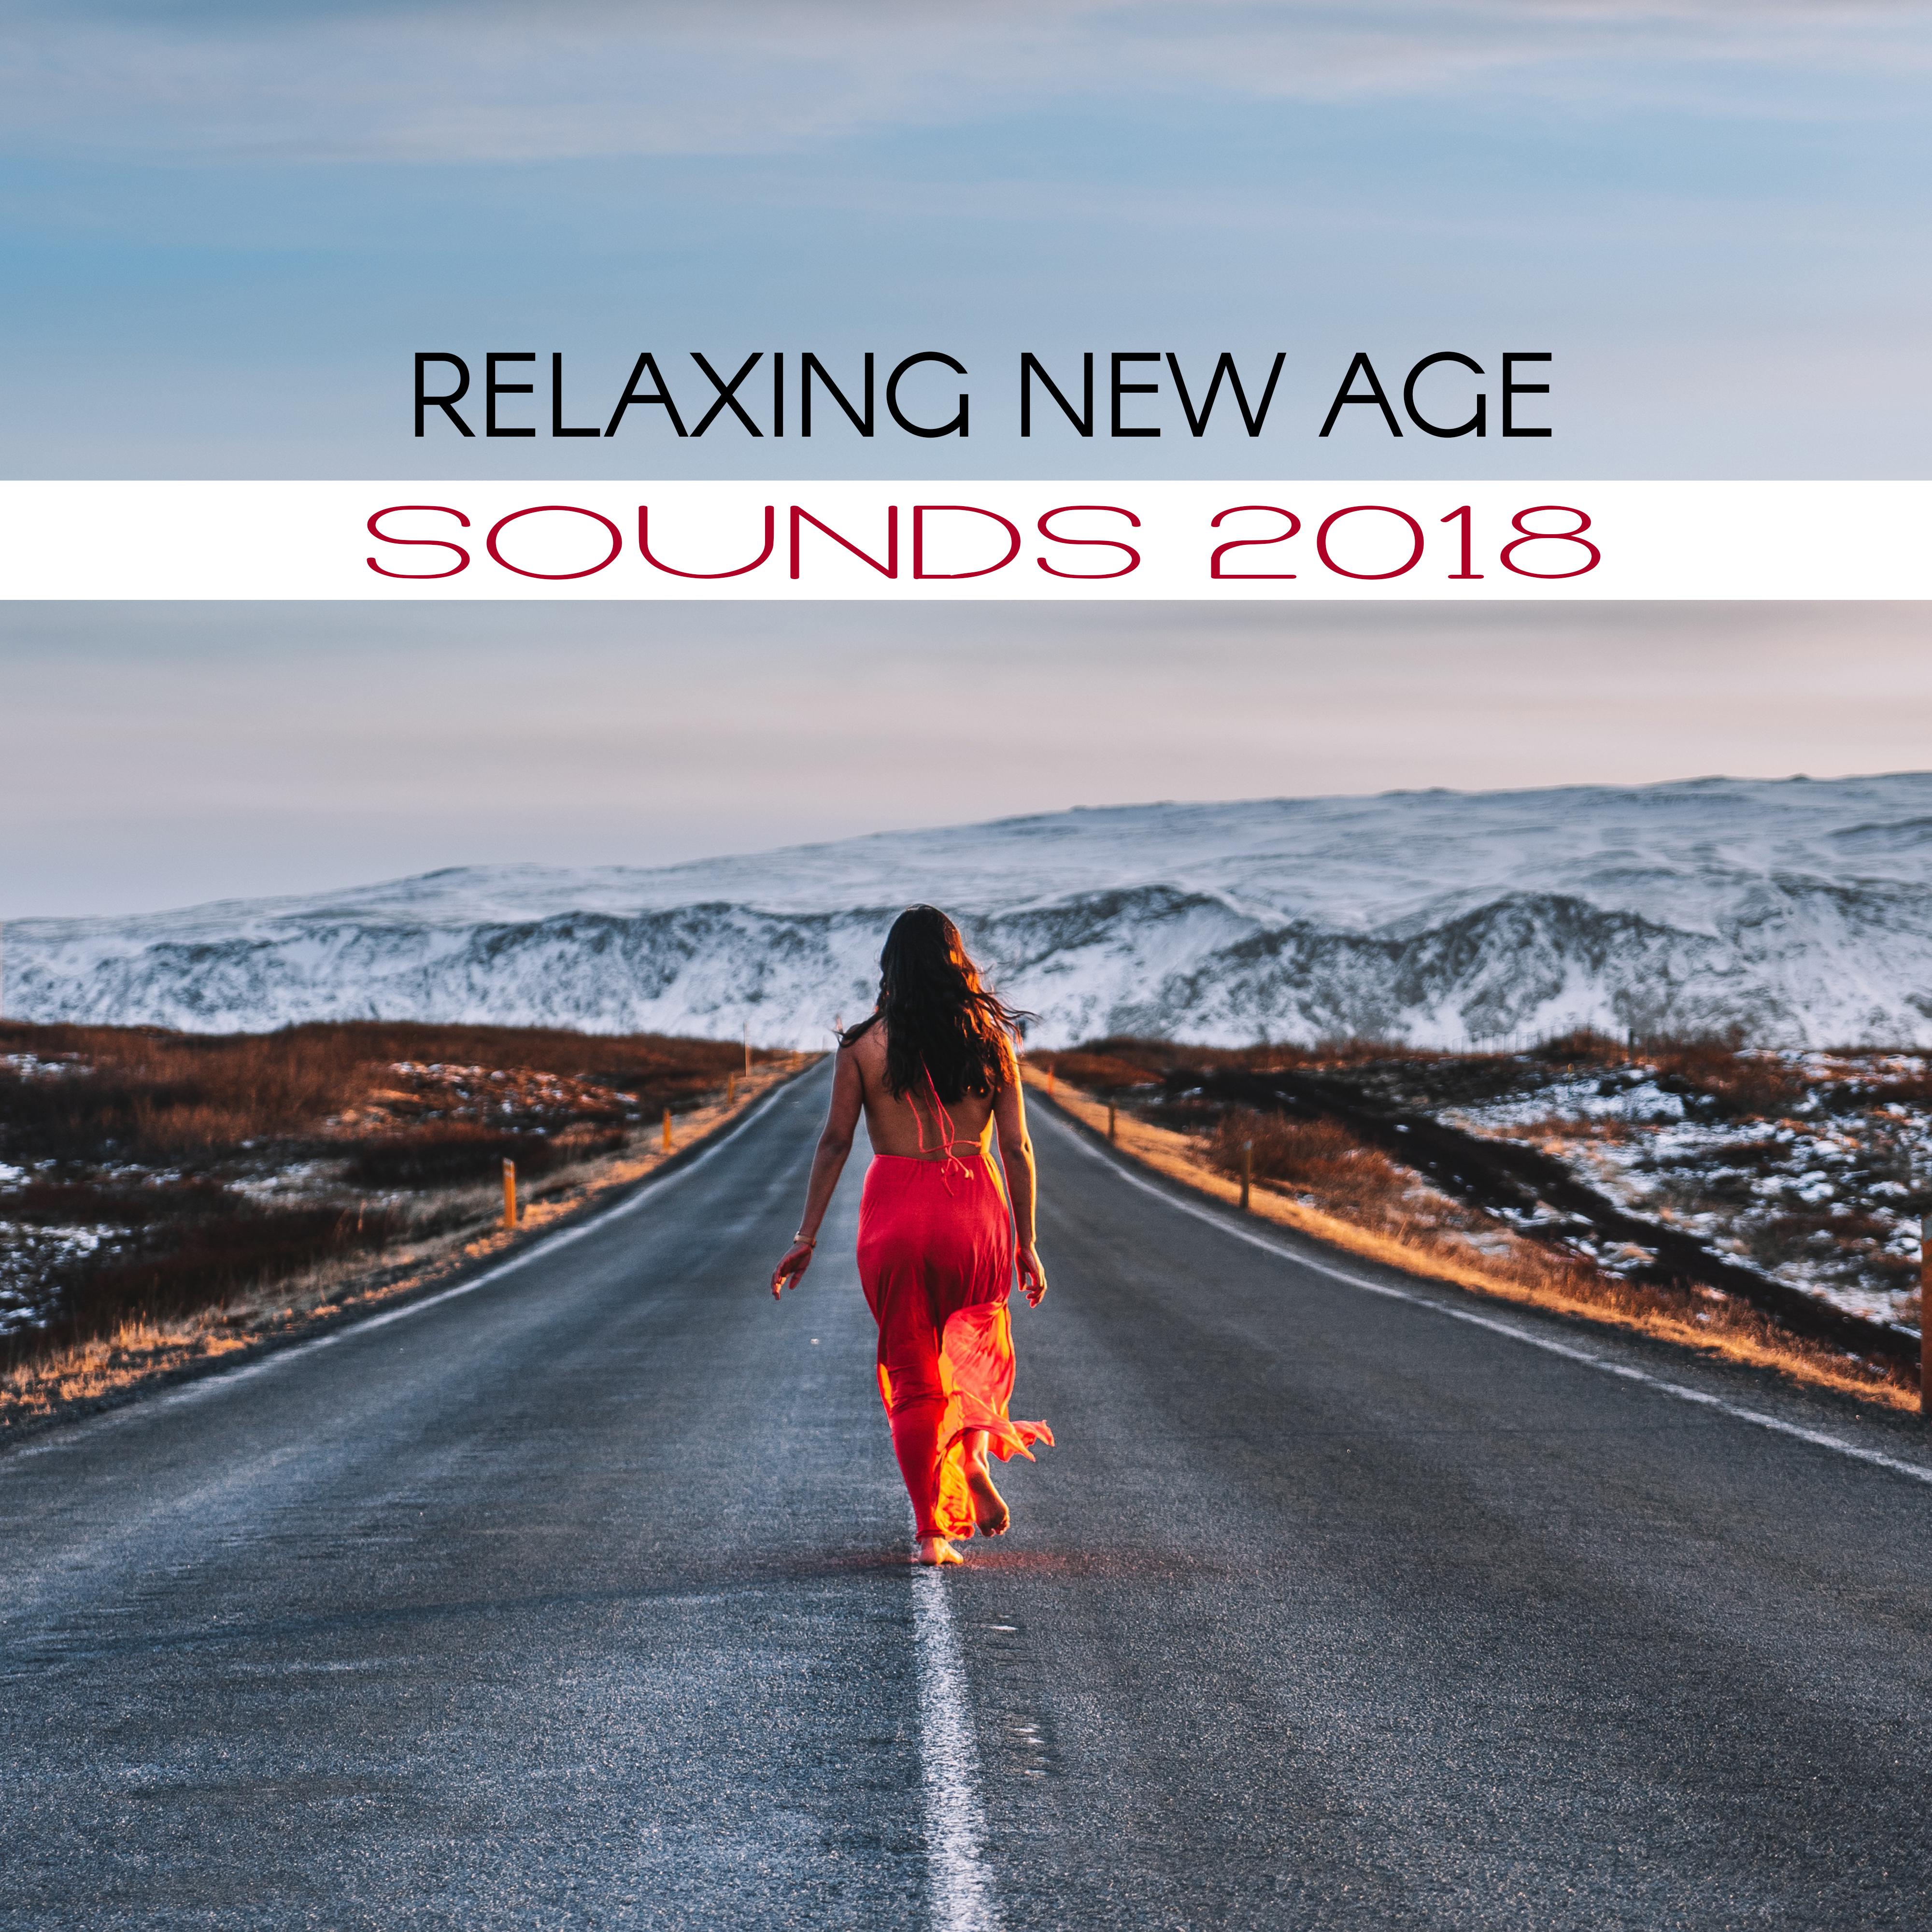 Relaxing New Age Sounds 2018